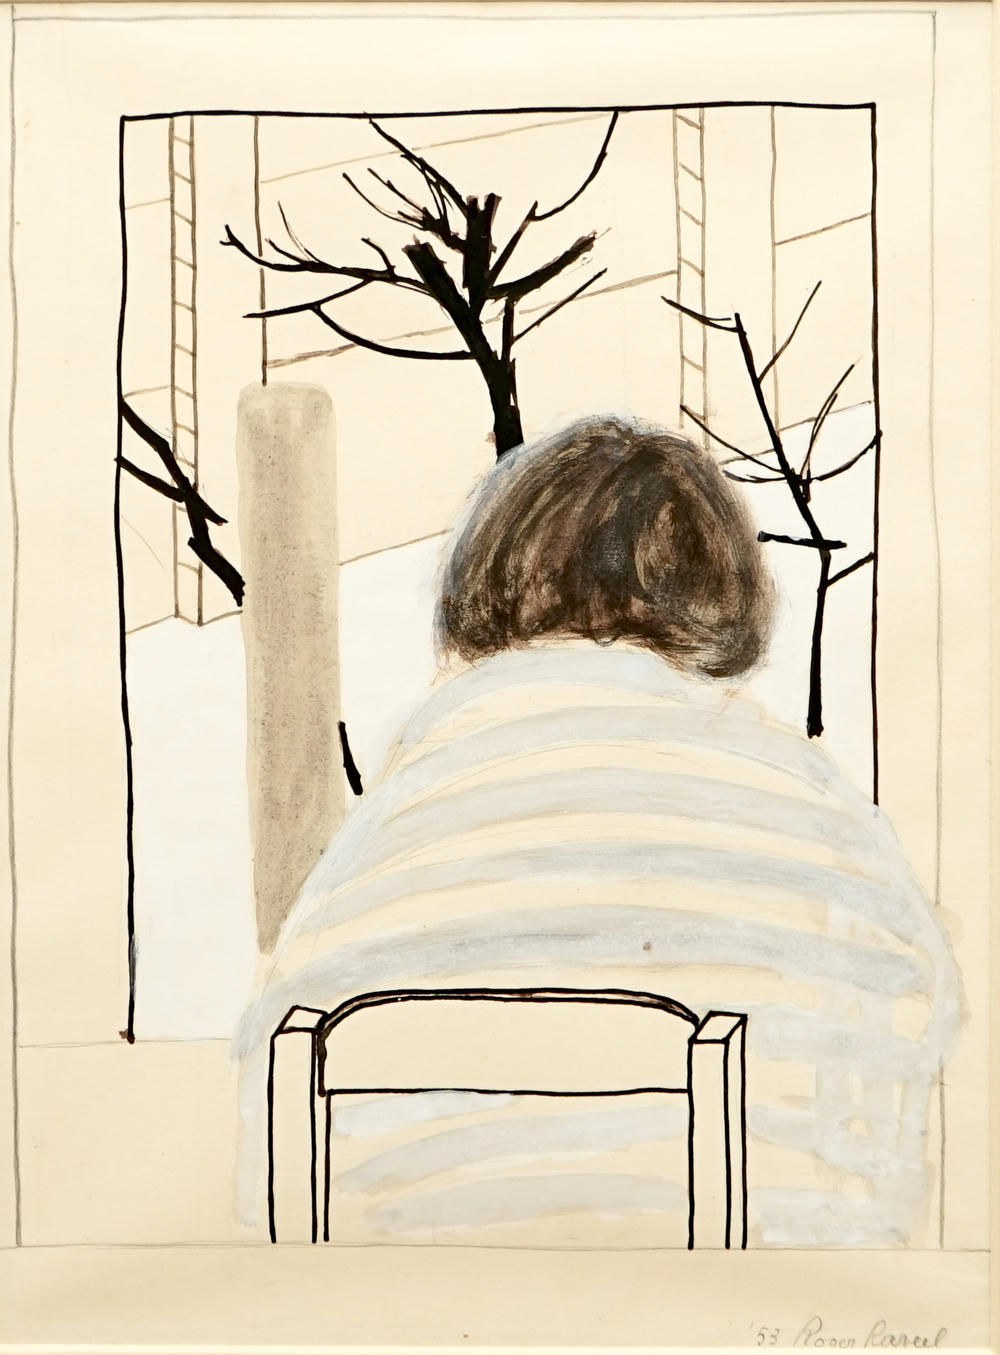 Roger Raveel (1921-2013), Zulma in a winter landscape, dated 1953, mixed technique on paper